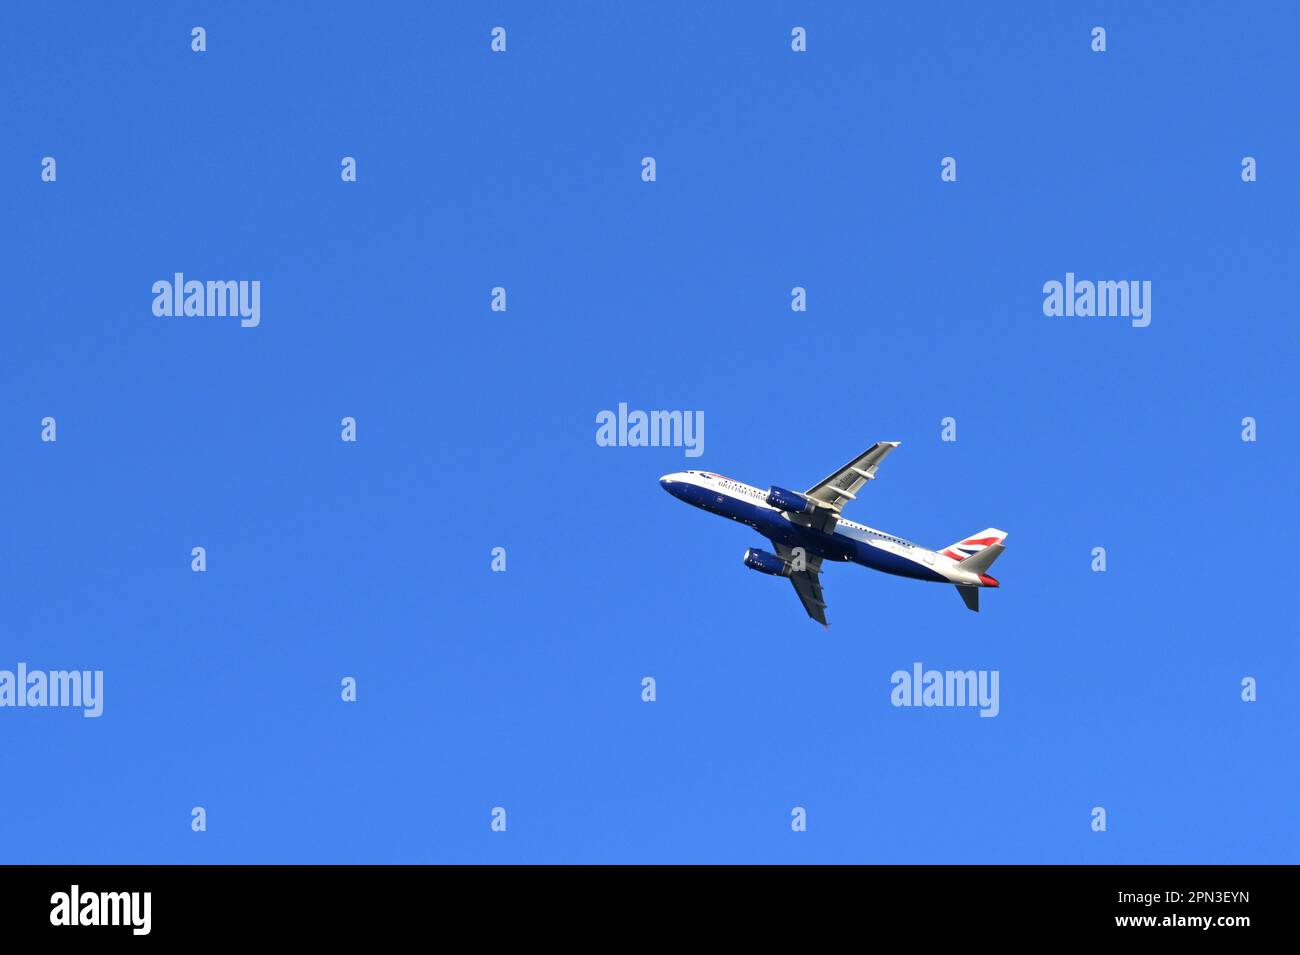 London, England - January 2023: British Airways Airbus jet climbing after take off from Heathrow Airport isolated against a deep blue sky Stock Photo